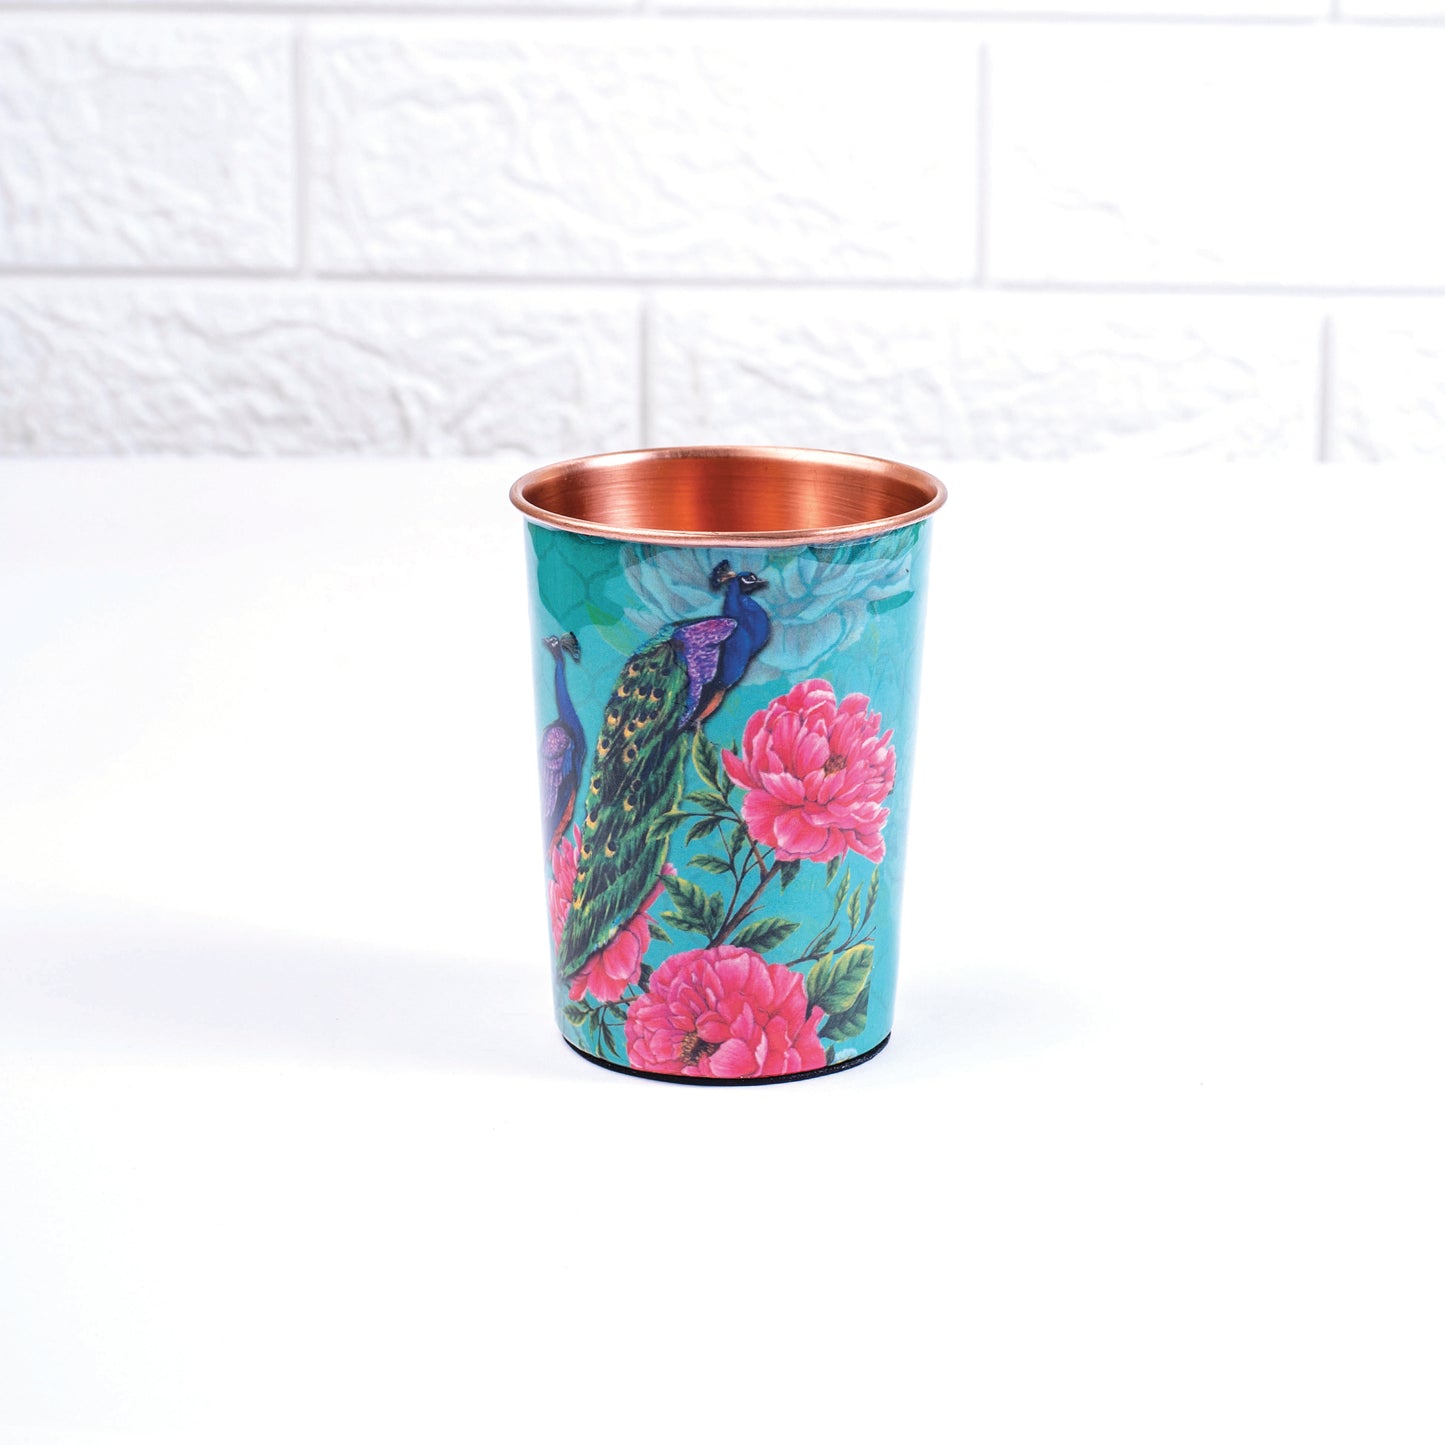 The Royal Peacock Copper Bottle and Tumblers - Gift Set